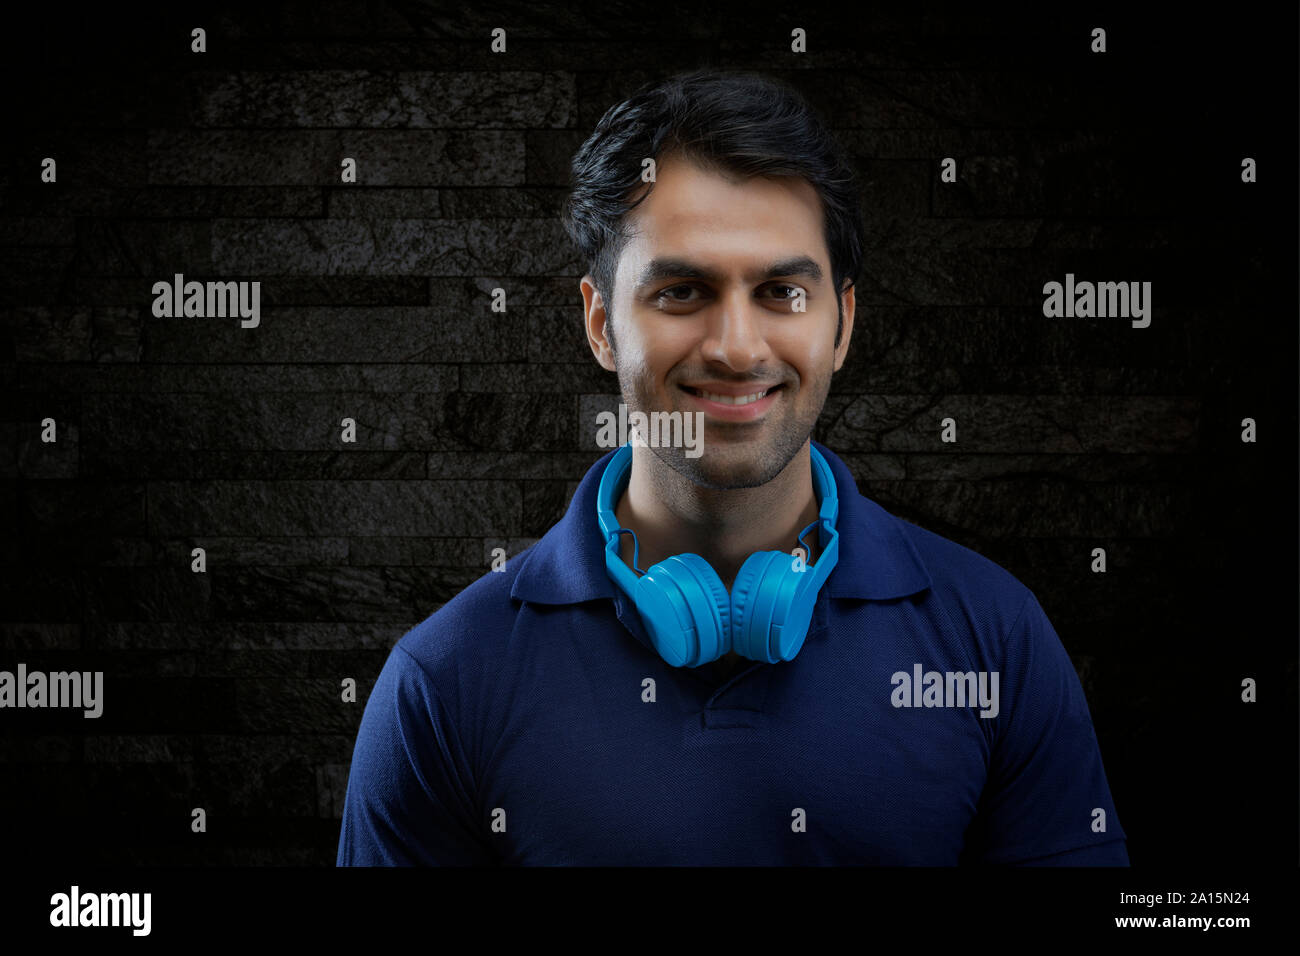 Portrait of smiling man with headphones on neck over black background Stock Photo